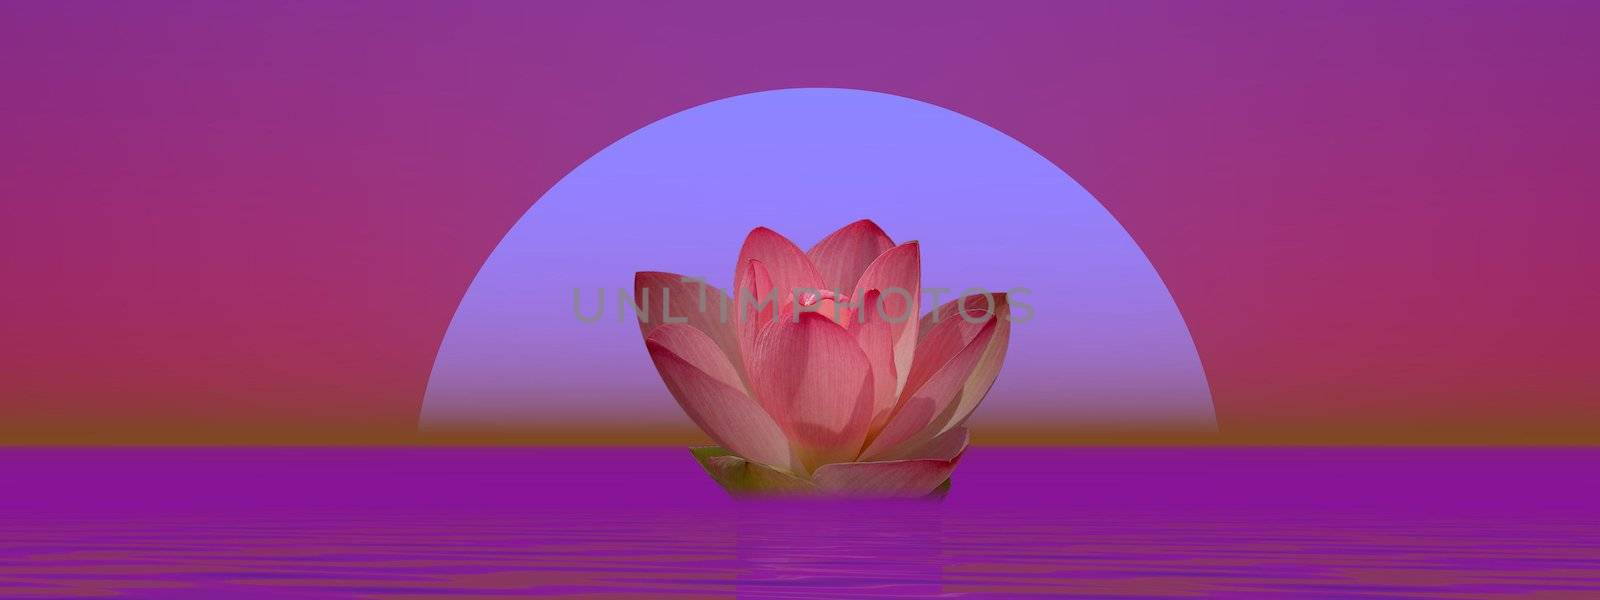 Pink lily flower on water in front of moon or sun